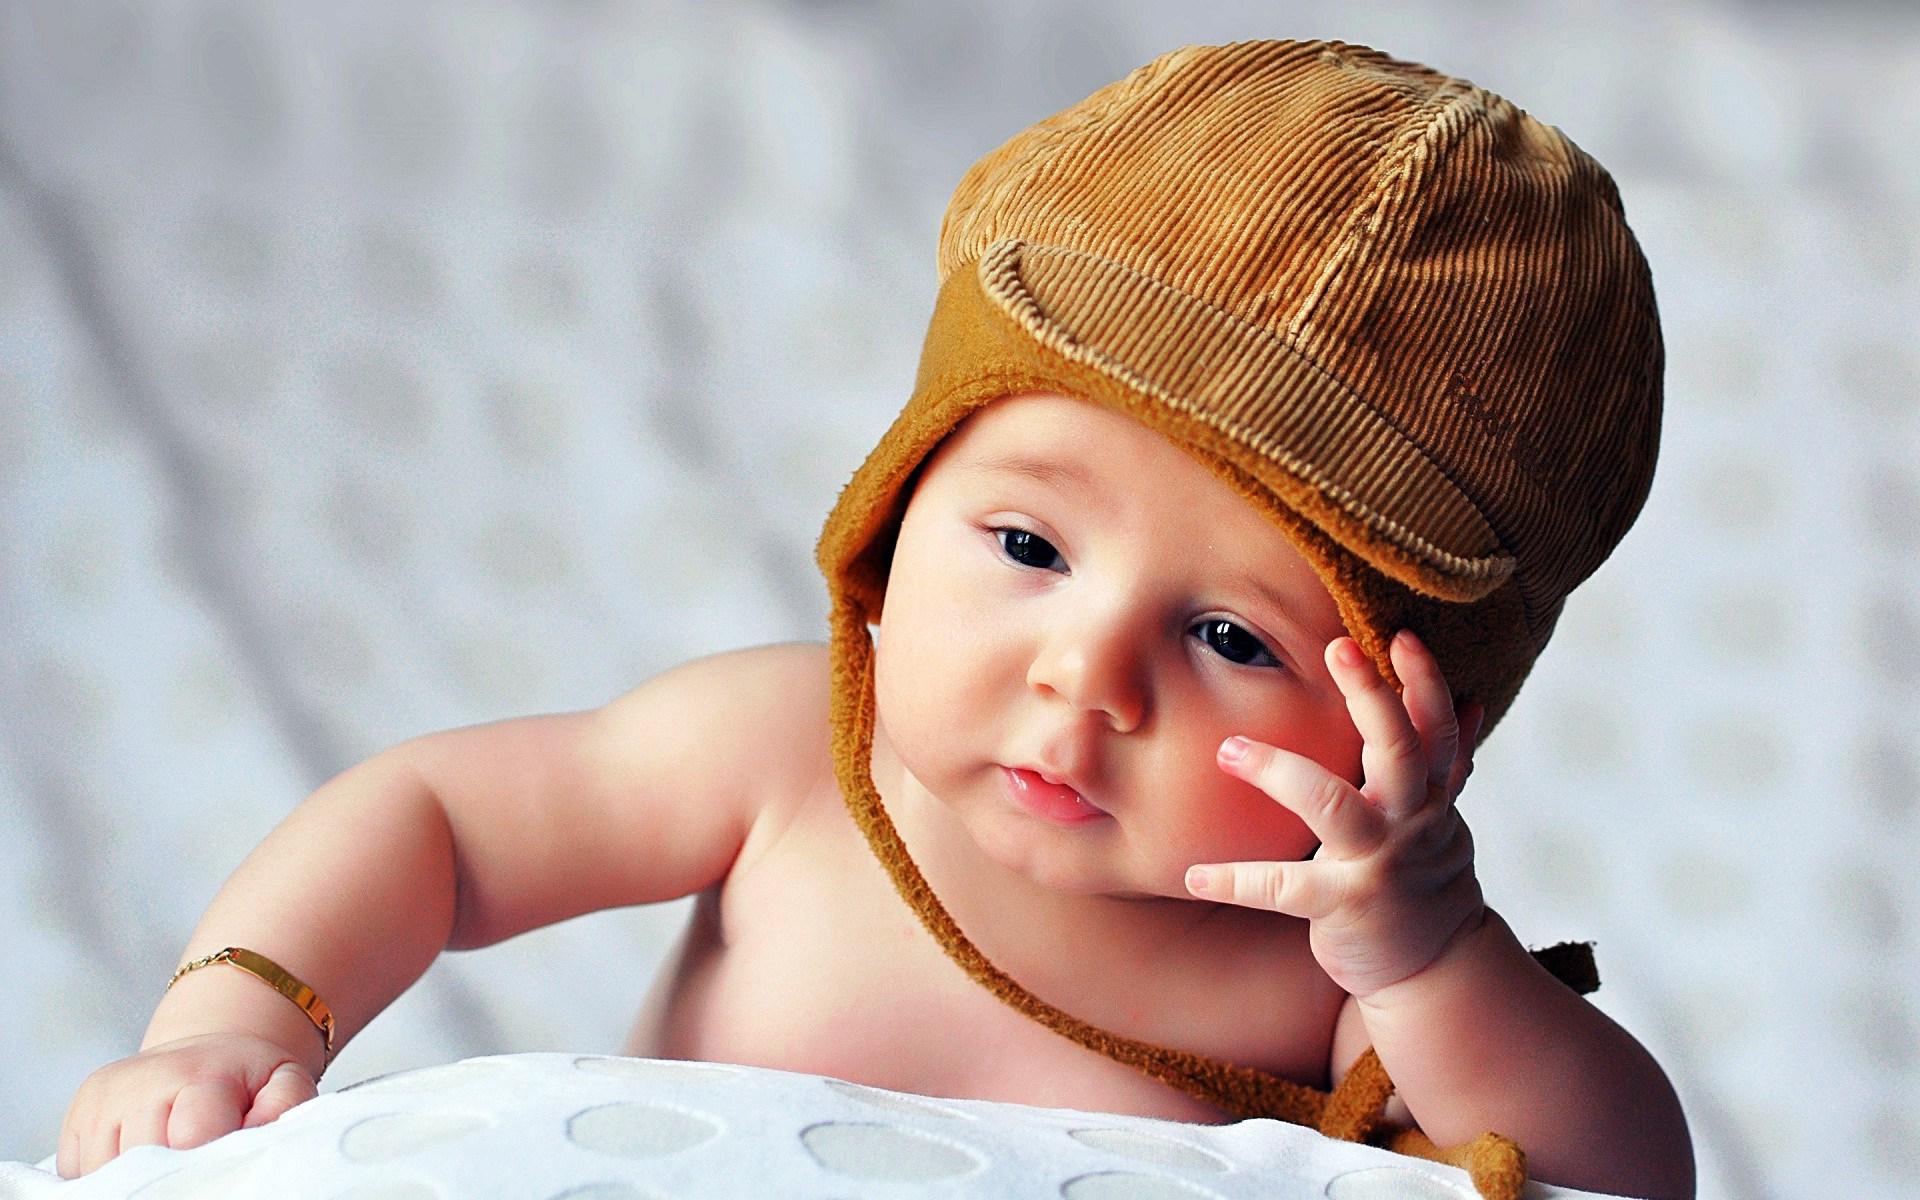 Cute Indian Baby Hd Wallpaper For Mobile ✓ Wallpaper - Baby Images Hd Download Free , HD Wallpaper & Backgrounds